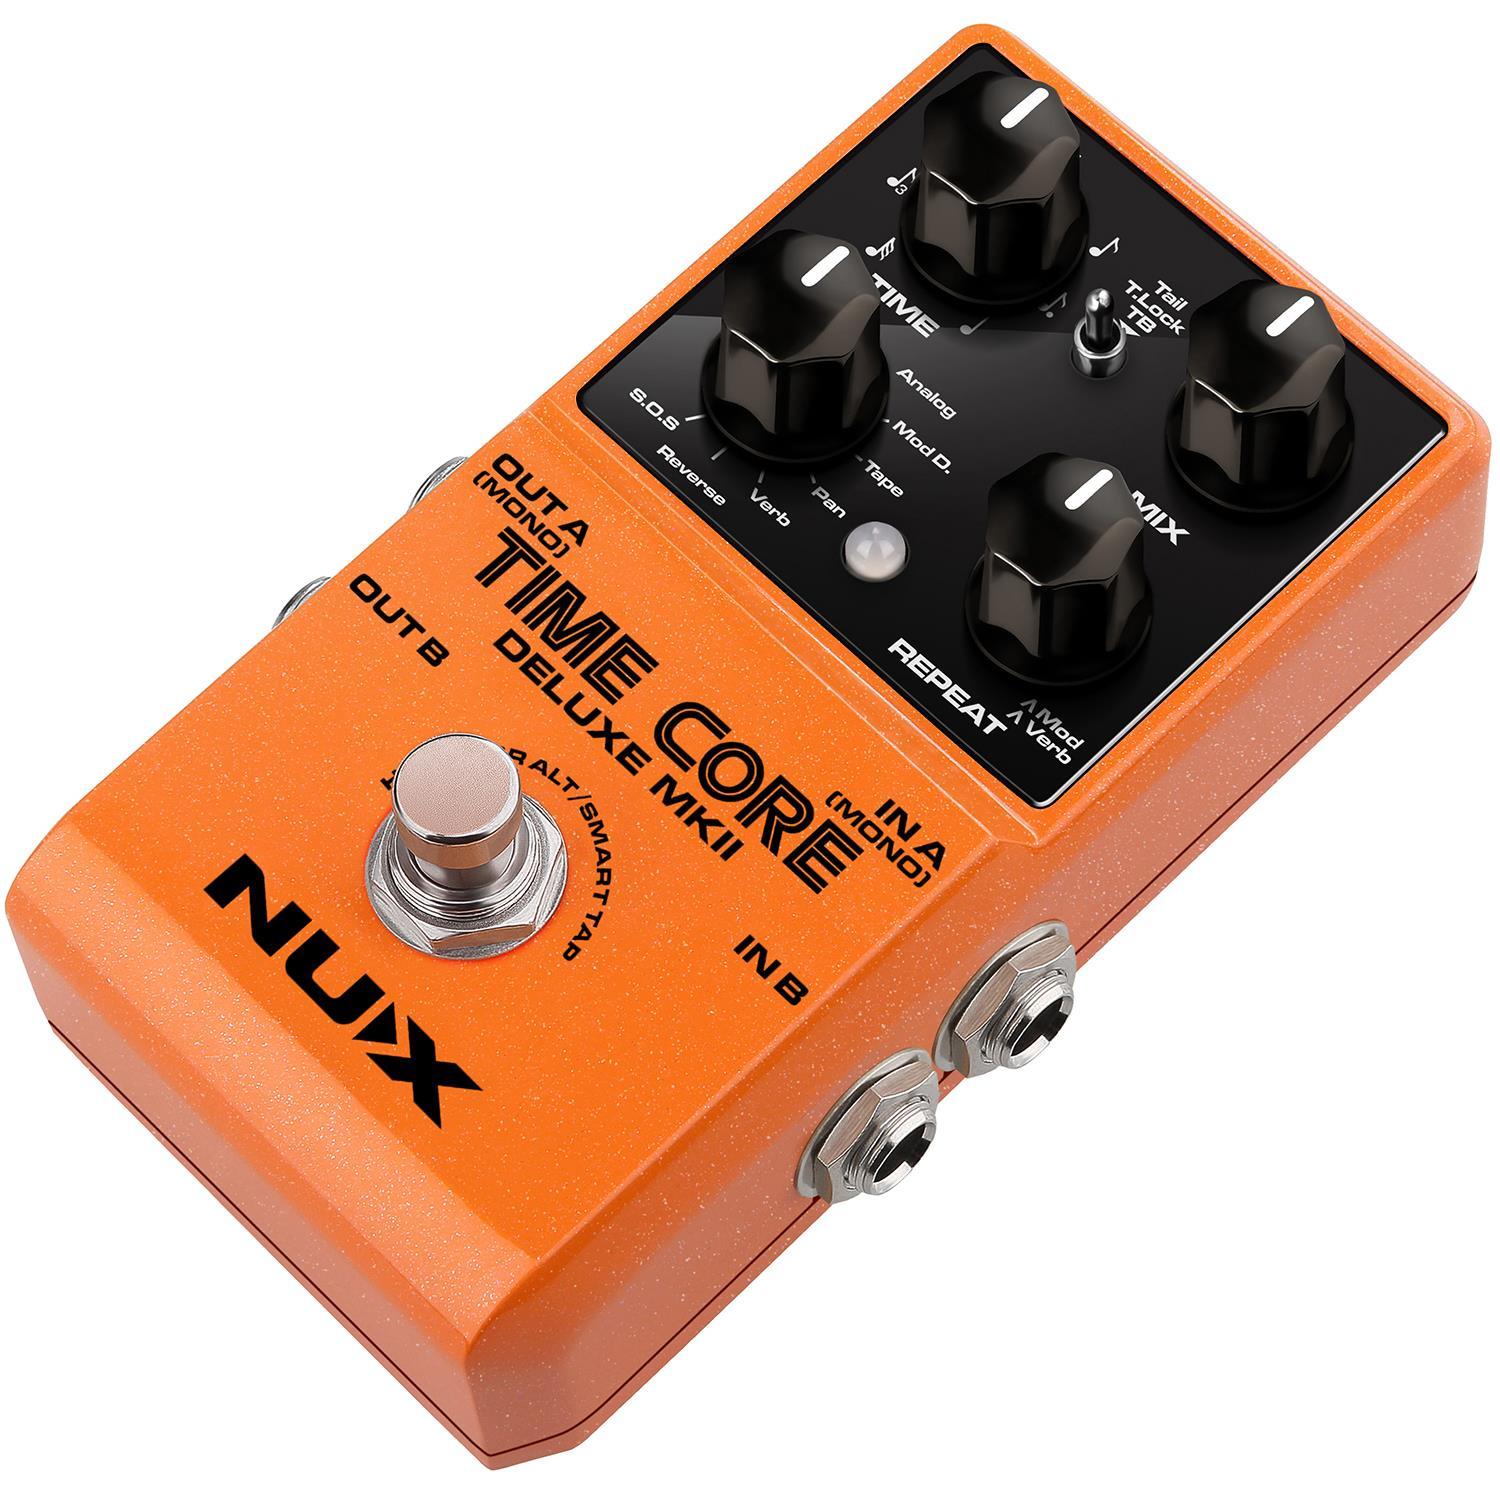 NUX Time Core Deluxe mkII Delay Pedal - DY Pro Audio